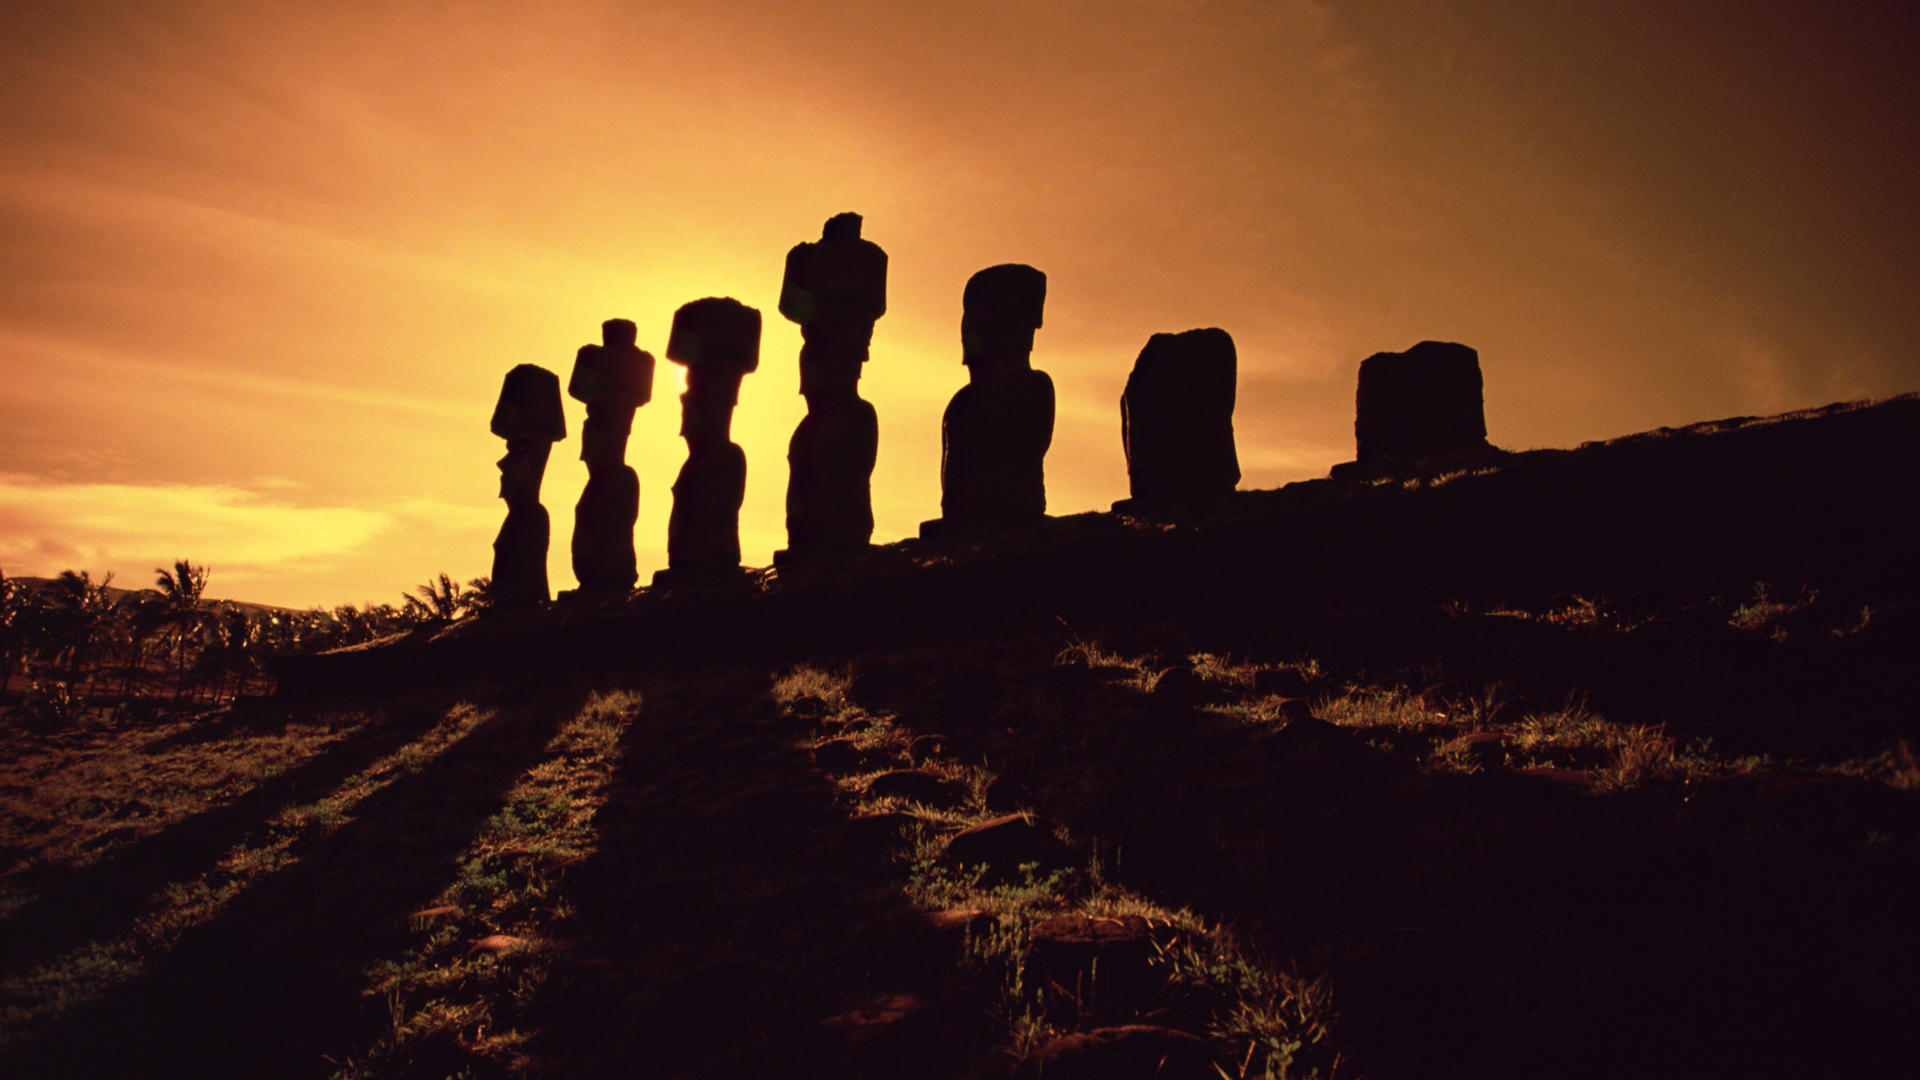 File Name 732467 Amazing Easter Island Pictures Background by Lorcan 1920x1080